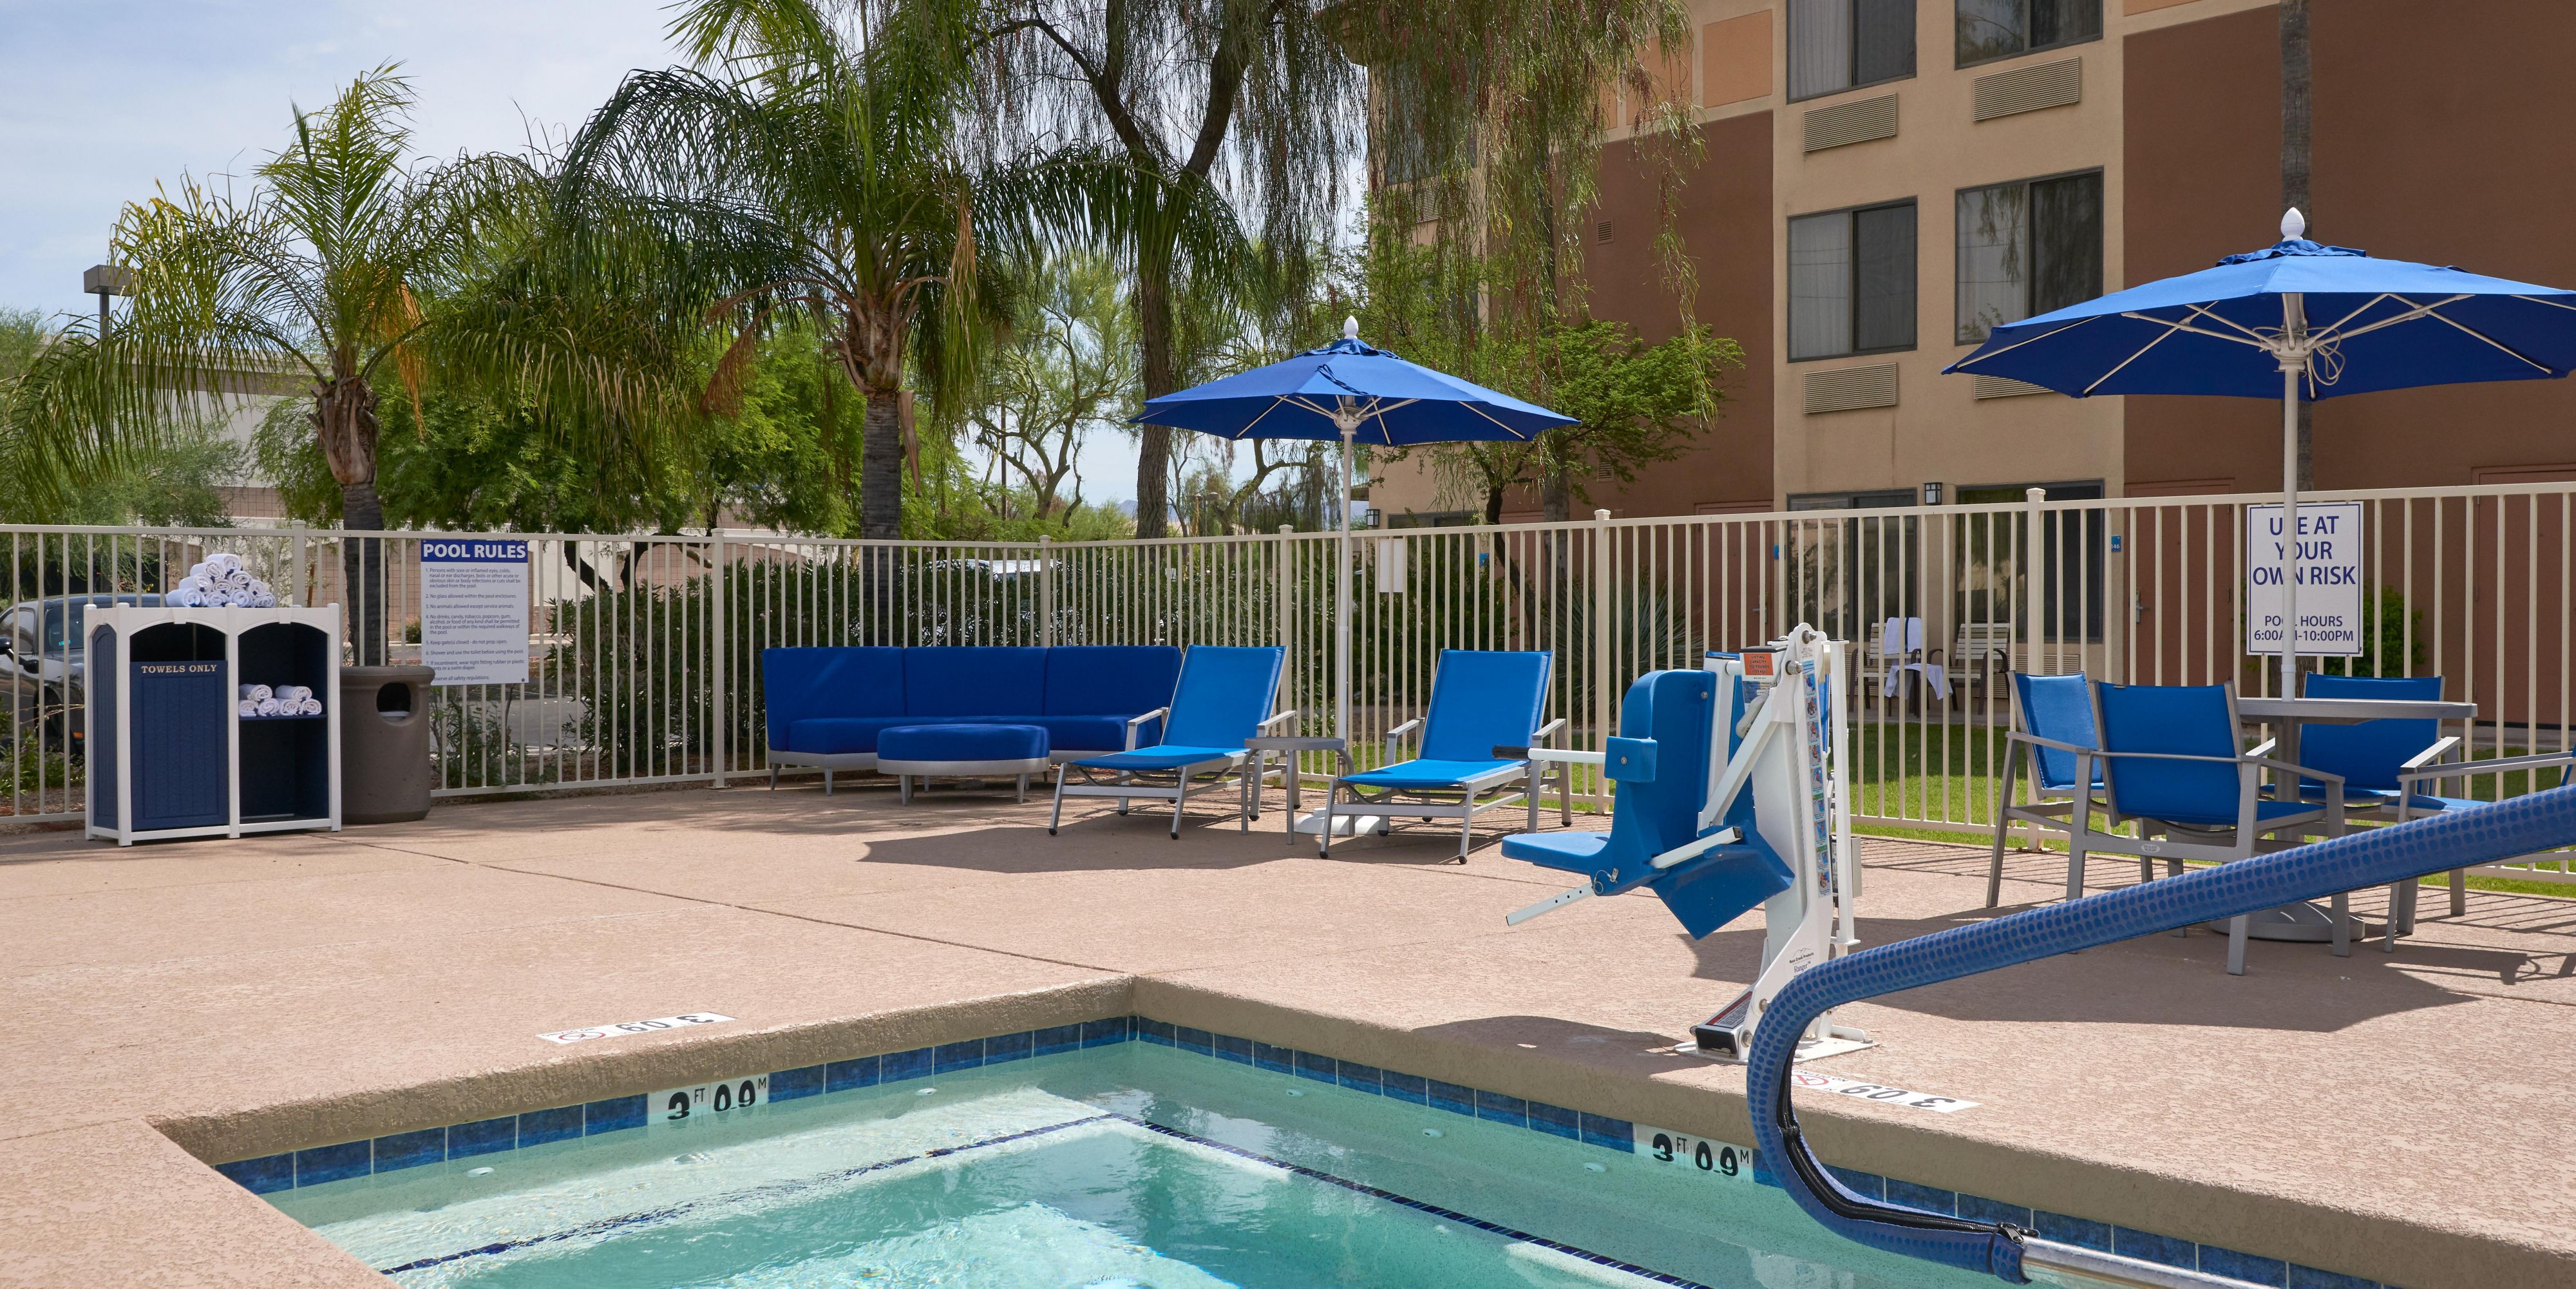 Experience ultimate relaxation at our hotel's outdoor pool and hot tub! Whether you're soaking up the Arizona sun or winding down after a long day, our pool and hot tub offers the perfect escape. Book your stay at the Holiday Inn Express Scottsdale North and enjoy our refreshing pool and hot tub today!



